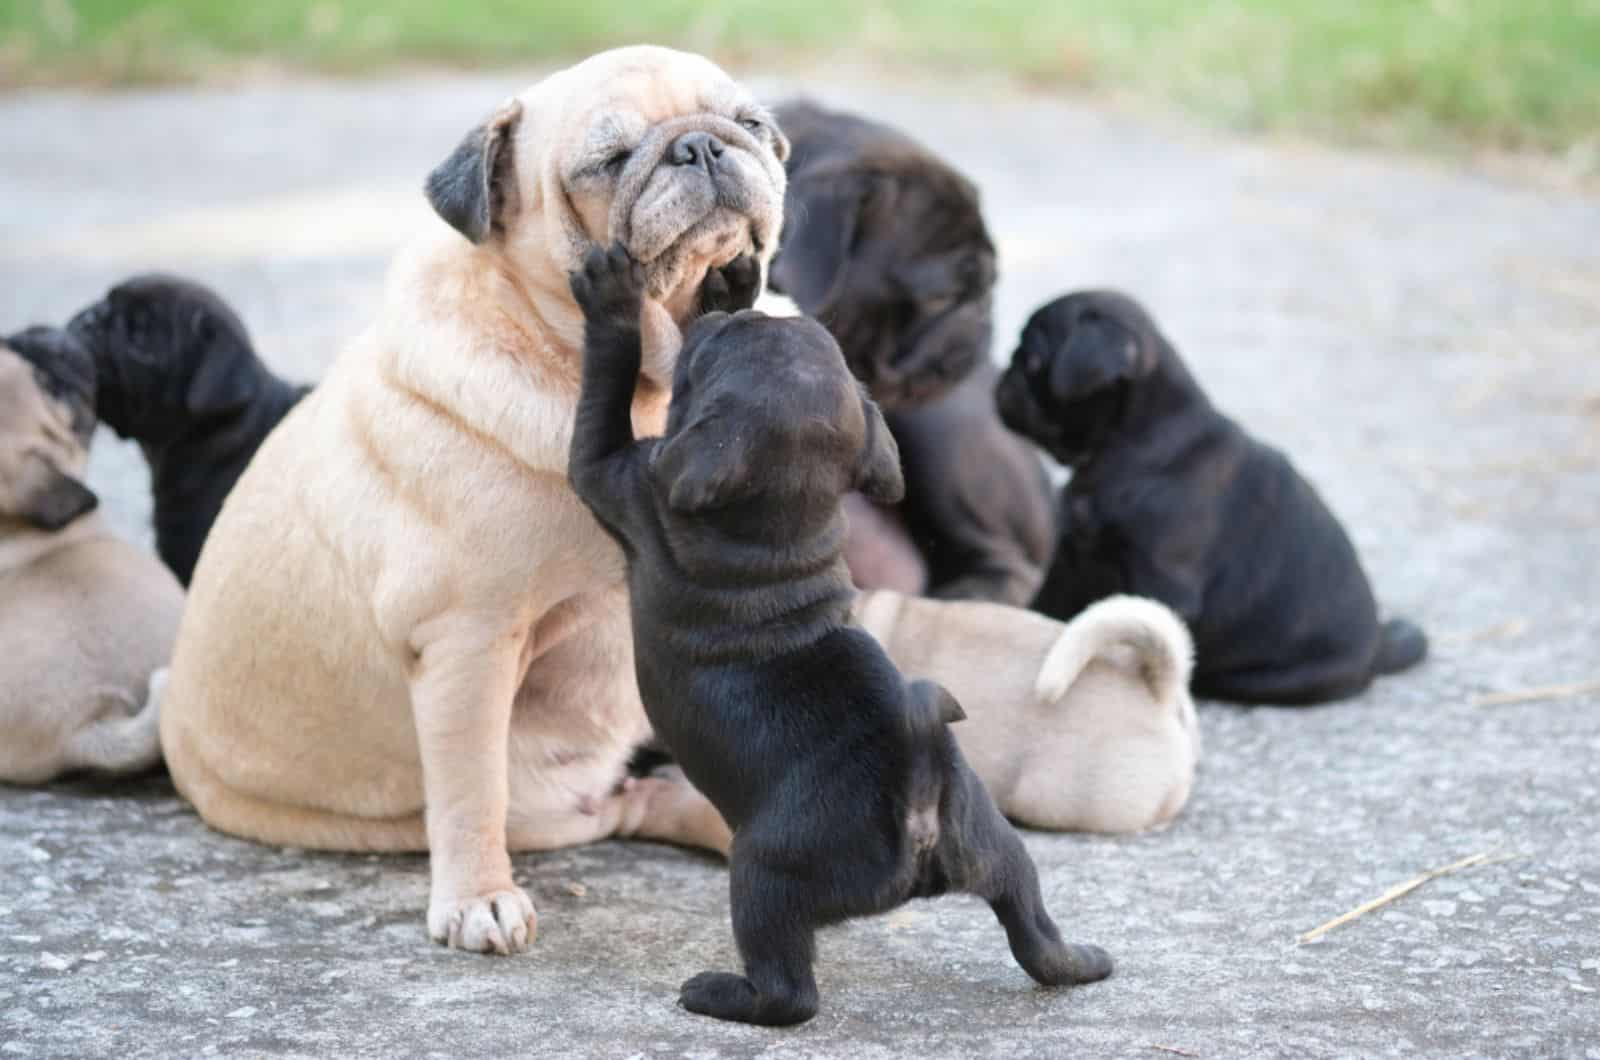 newborn pug puppies playing with their mother